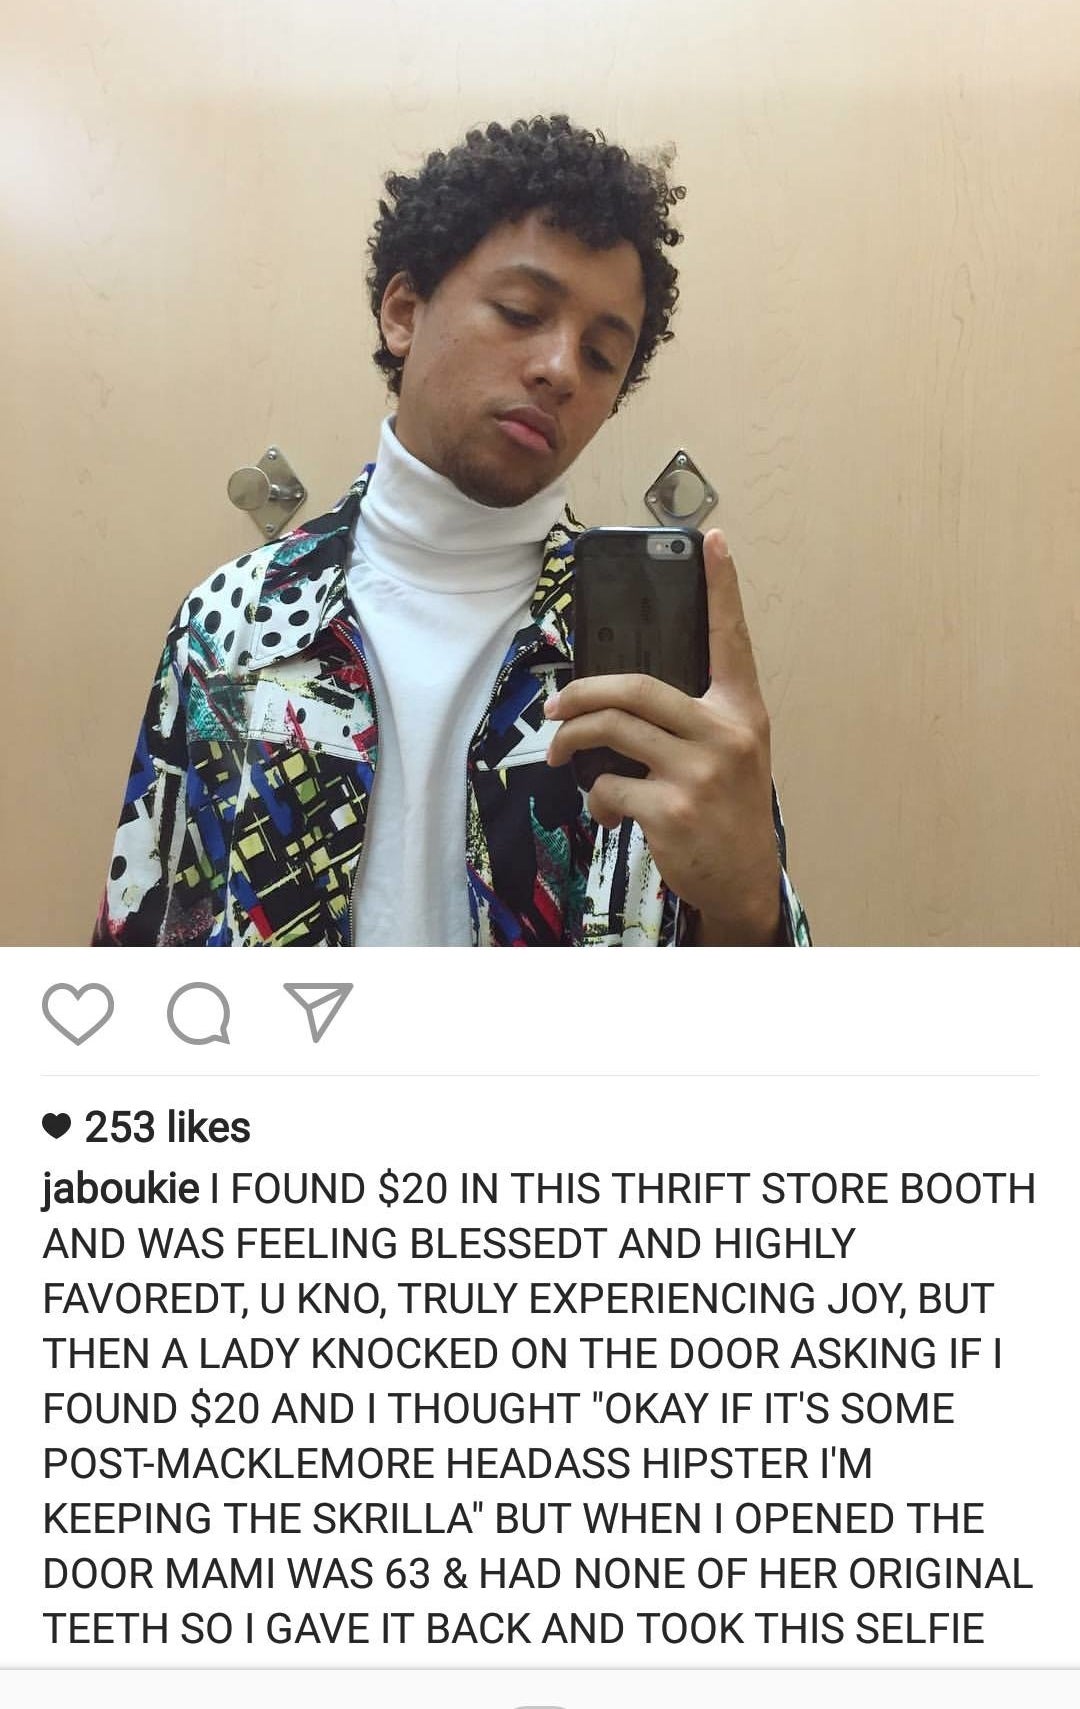 This Guy's Instagram Captions Are Gloriously Extra